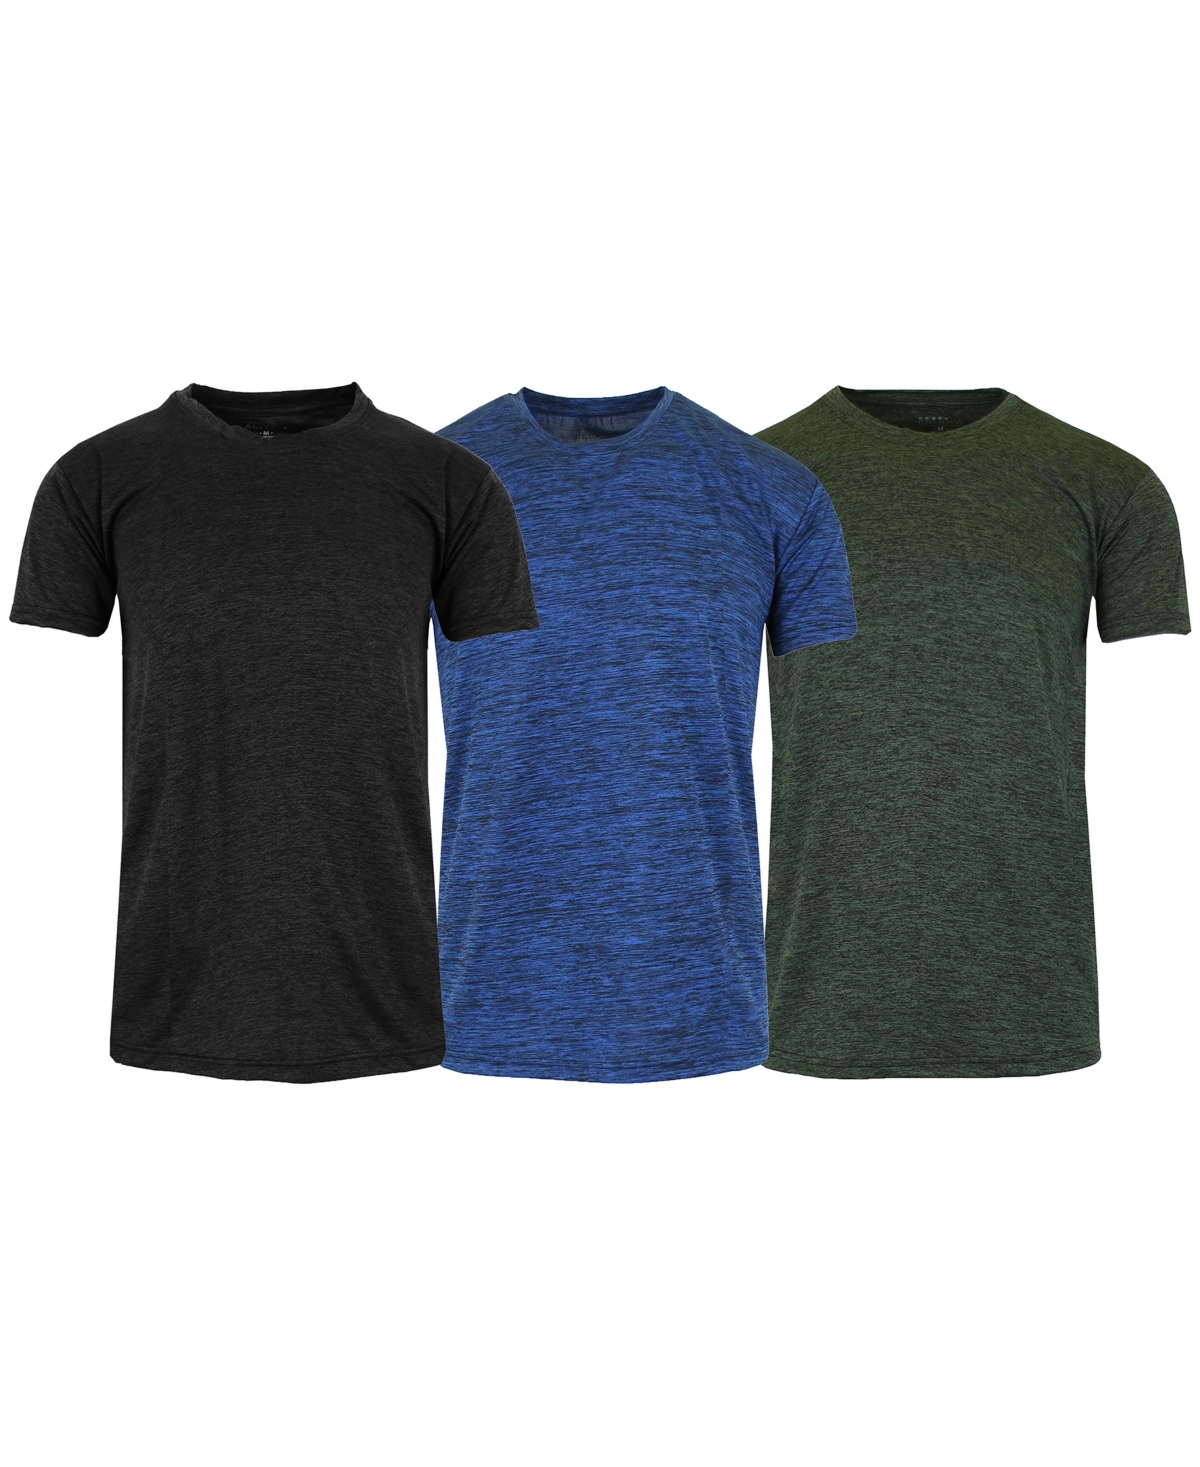  Galaxy By Harvic Men's Performance T-shirt, Pack of 3